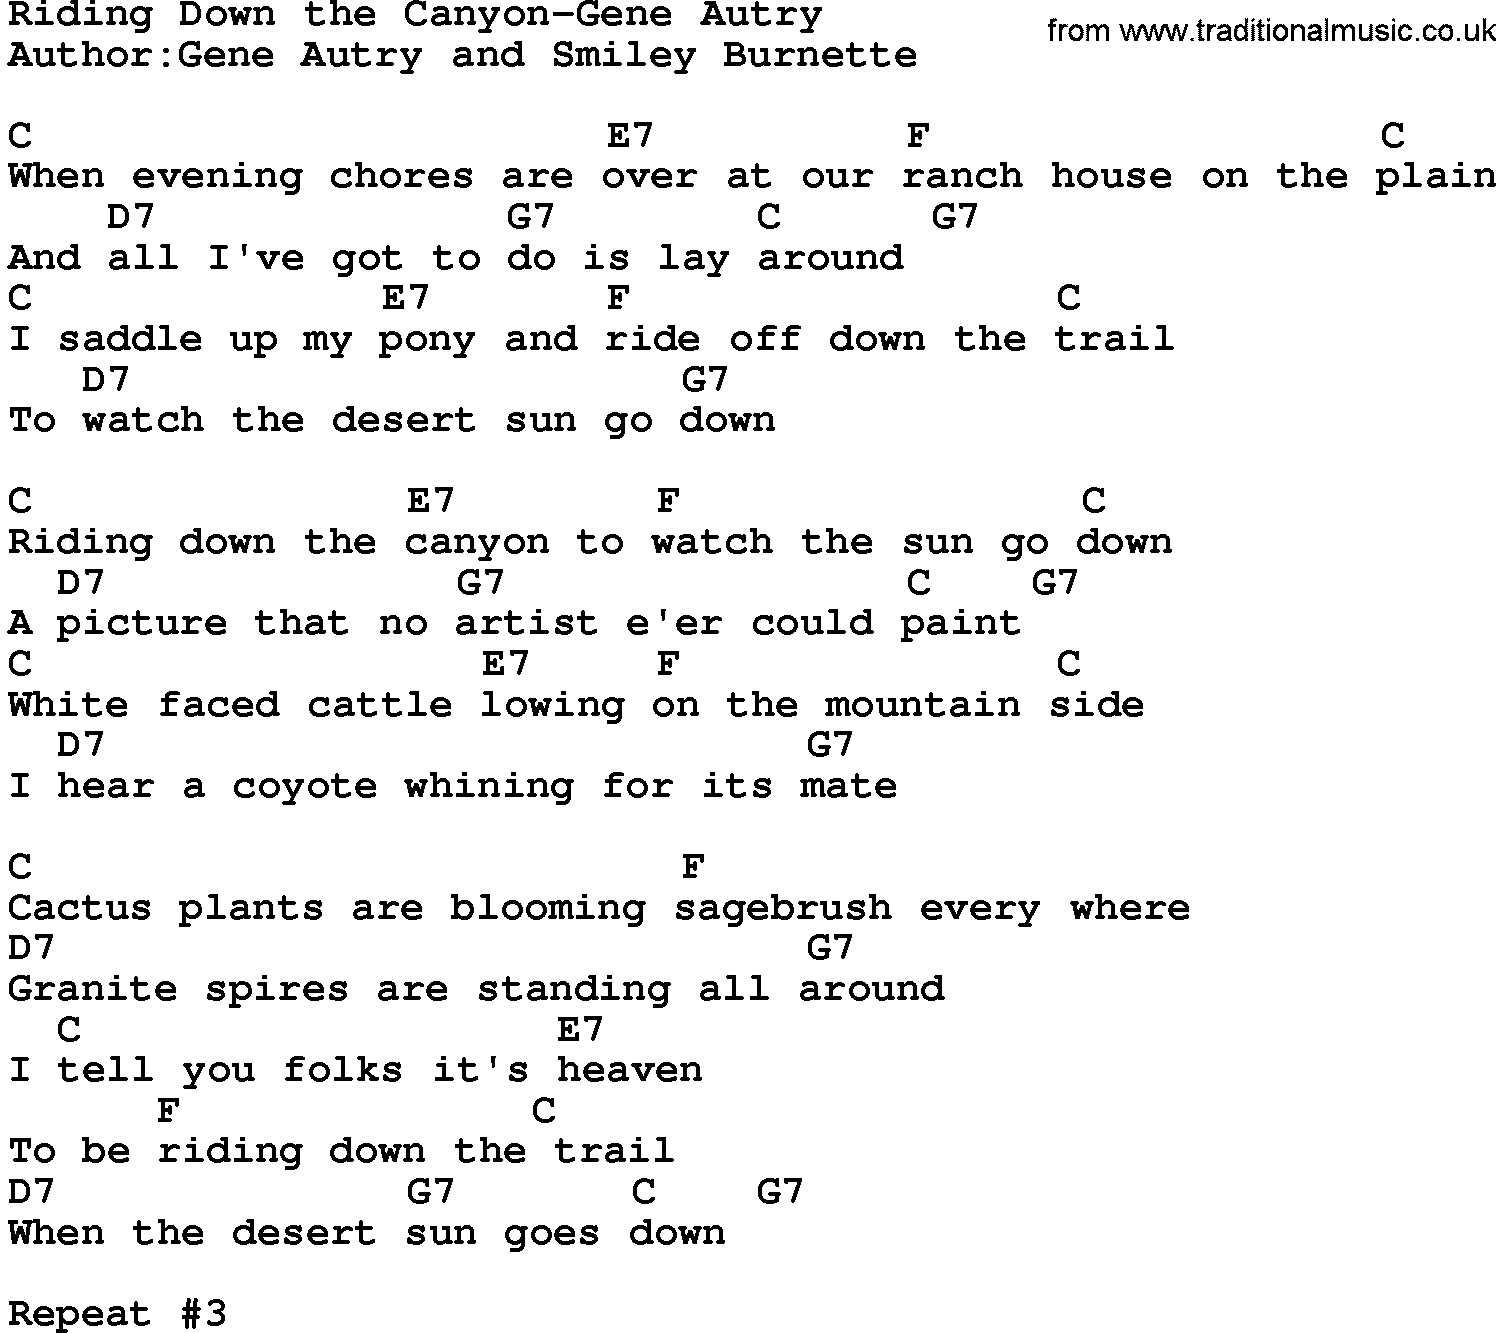 Country music song: Riding Down The Canyon-Gene Autry lyrics and chords